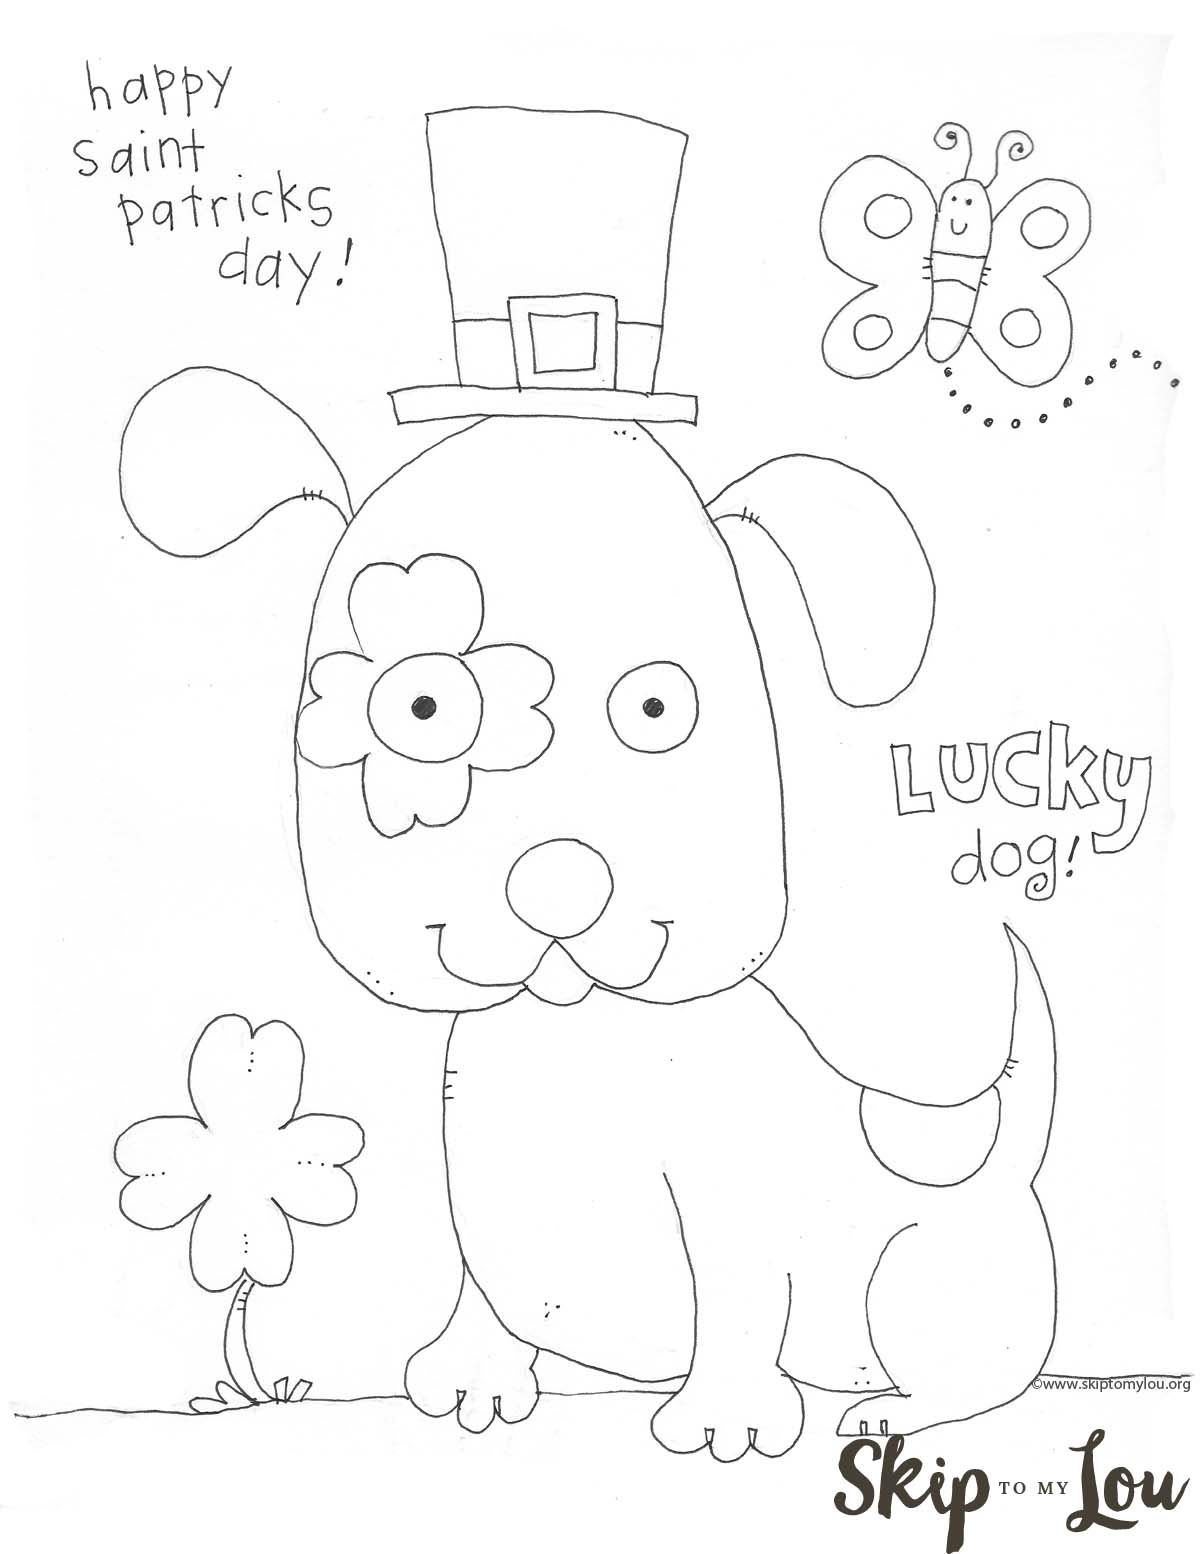 St. Patrick&amp;#039;s Day Coloring Page Preschool- Free Printable | St - Free Printable St Patrick Day Coloring Pages